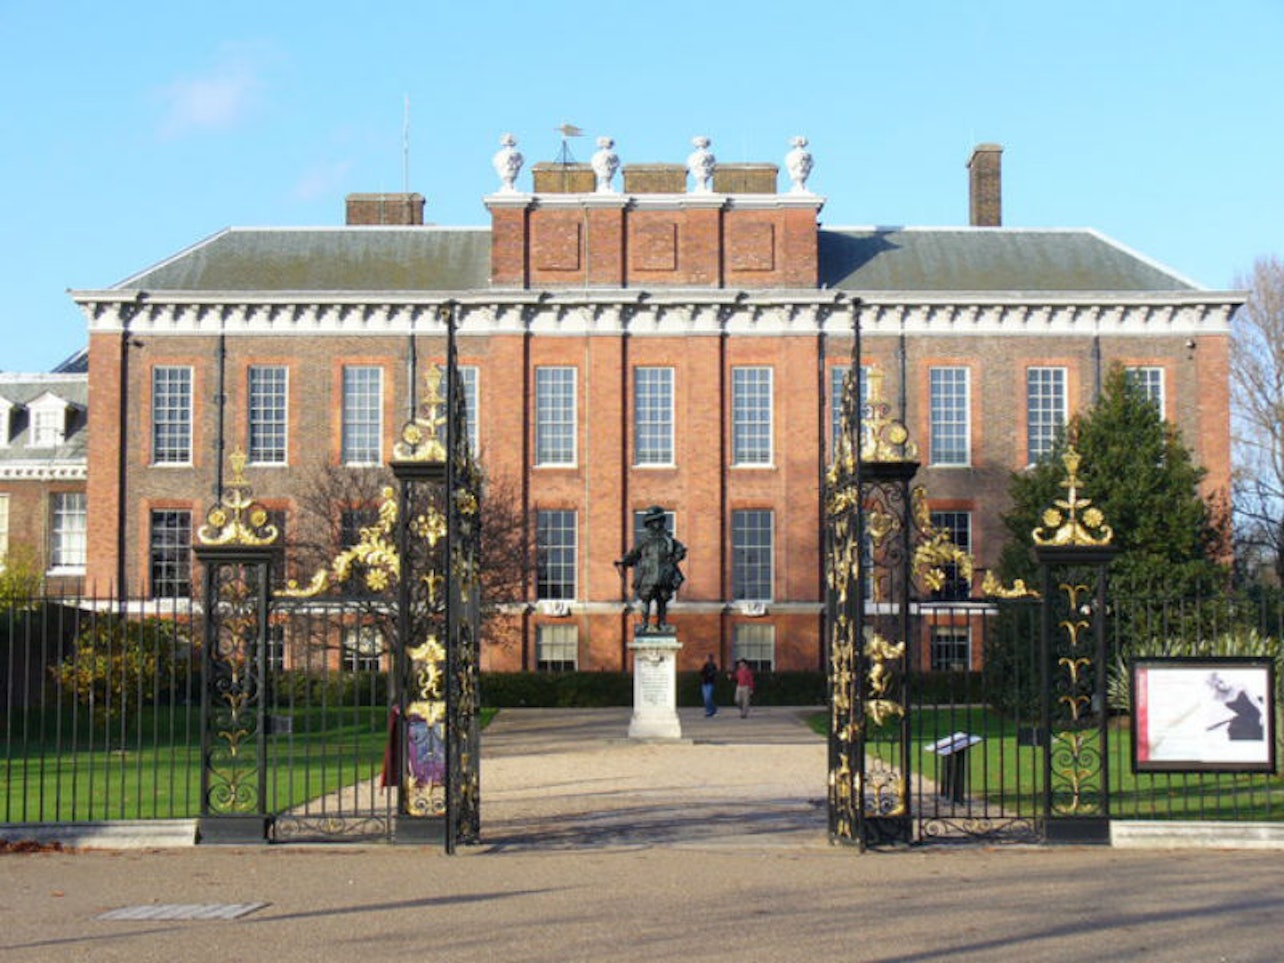 Kensington Palace - Accommodations in London